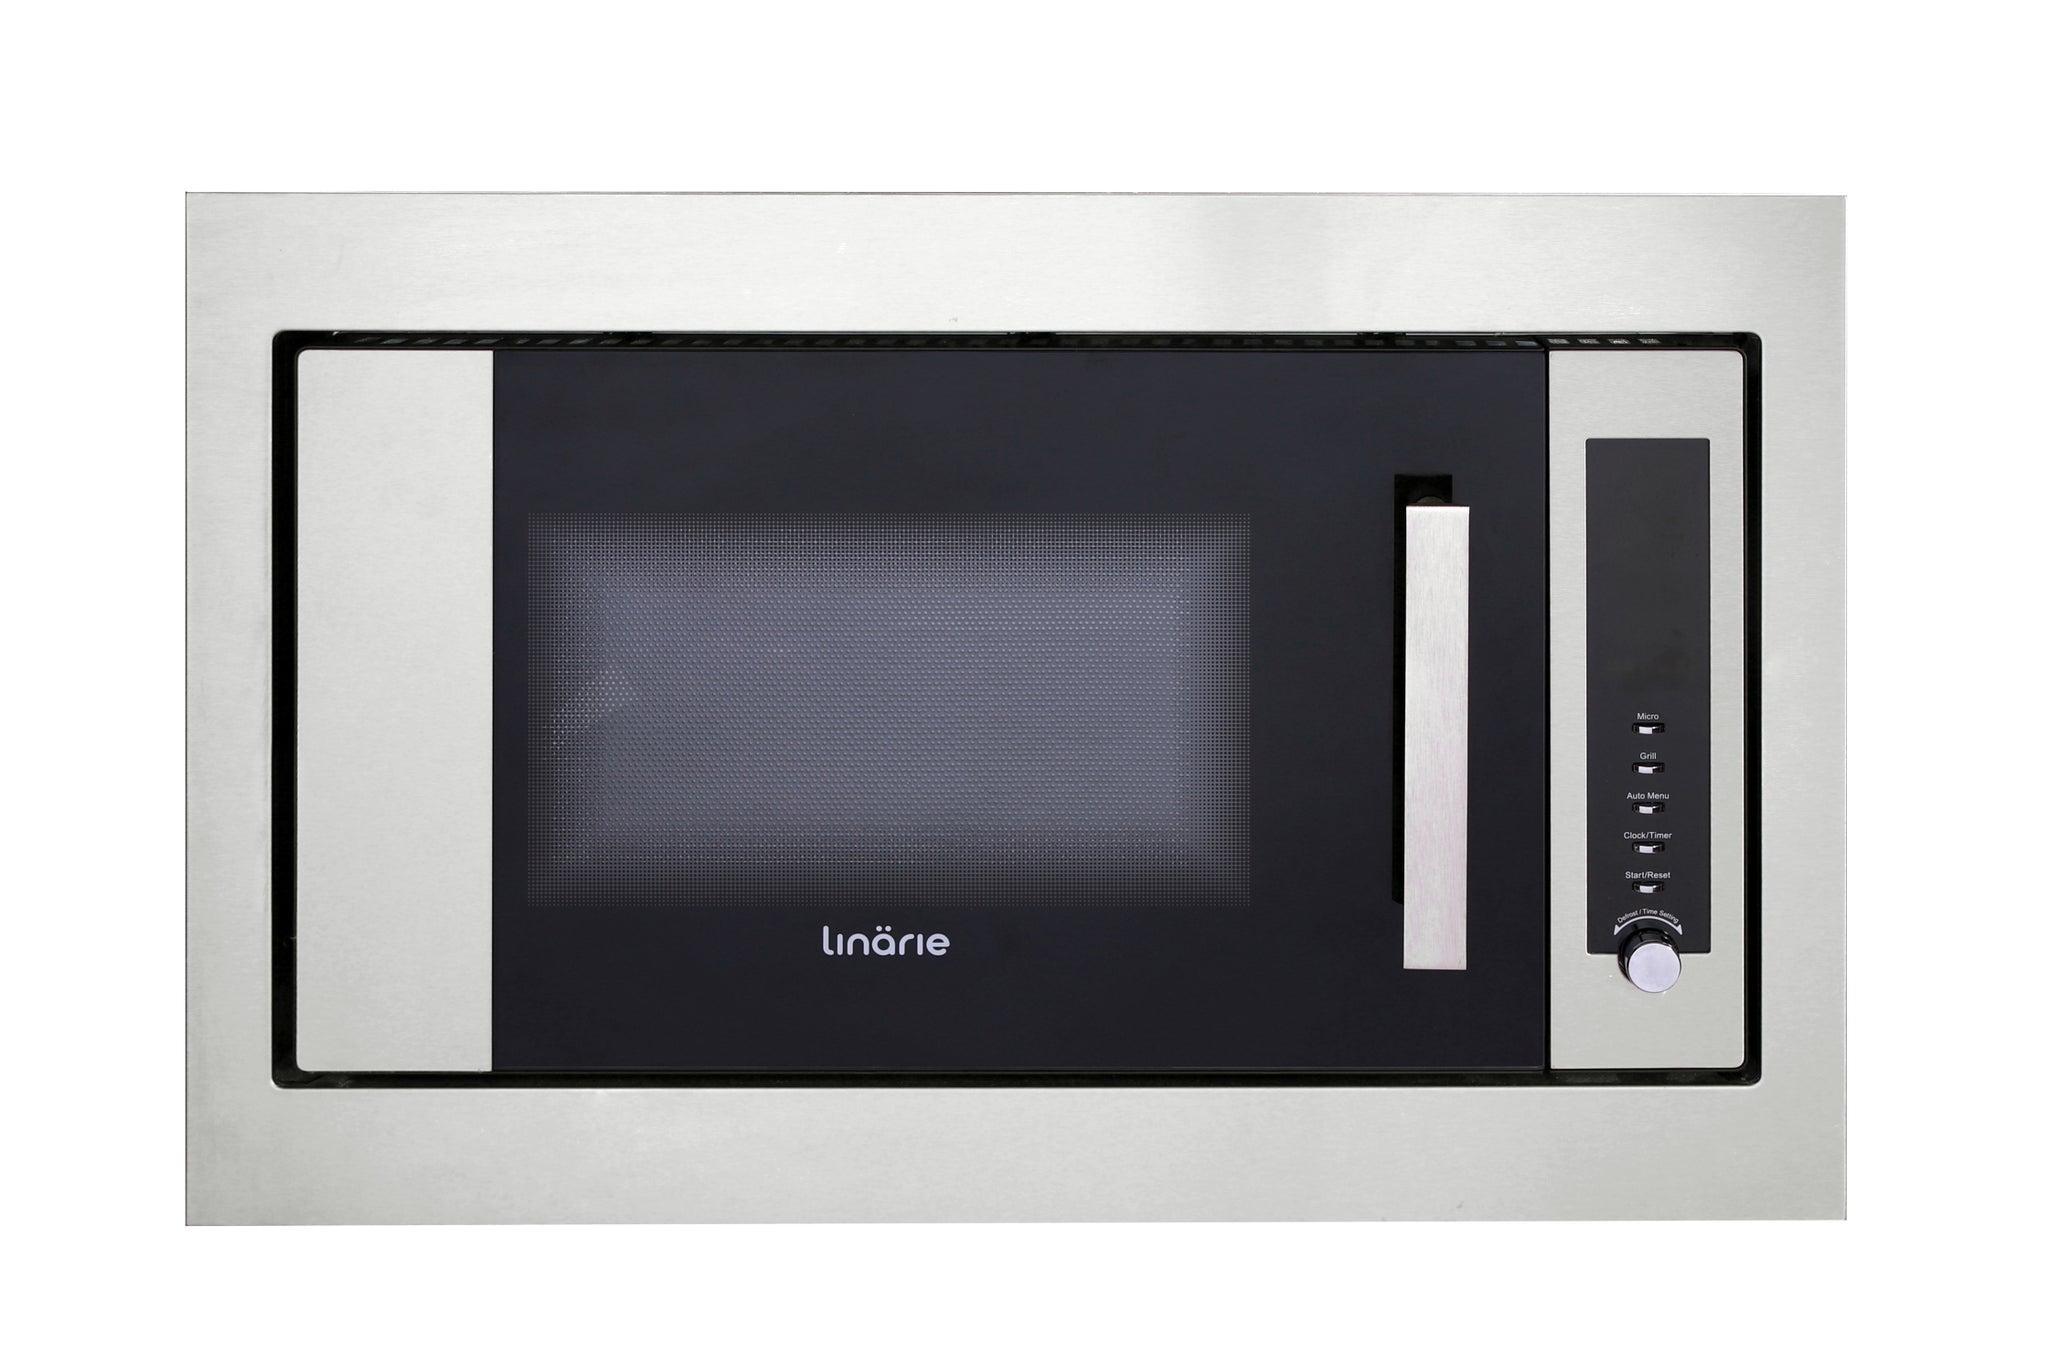 Linarie Vecchio 30L Grill Combi Built-In Turntable Microwave in Stainless Steel - LJMO30GXBI